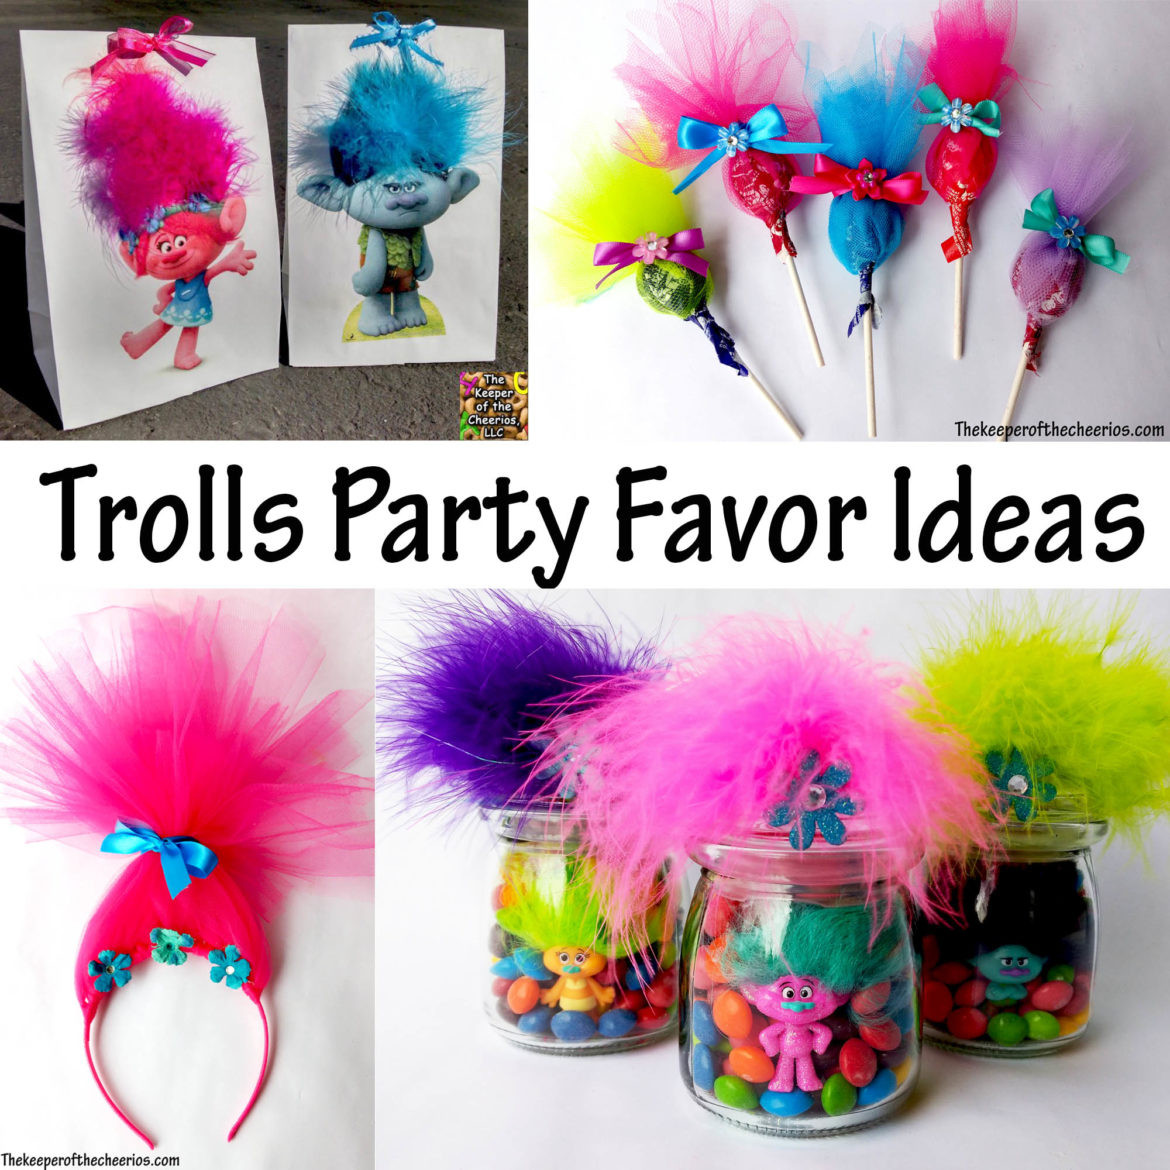 Trolls Party Favor Ideas
 Trolls Party Favor Ideas The Keeper of the Cheerios